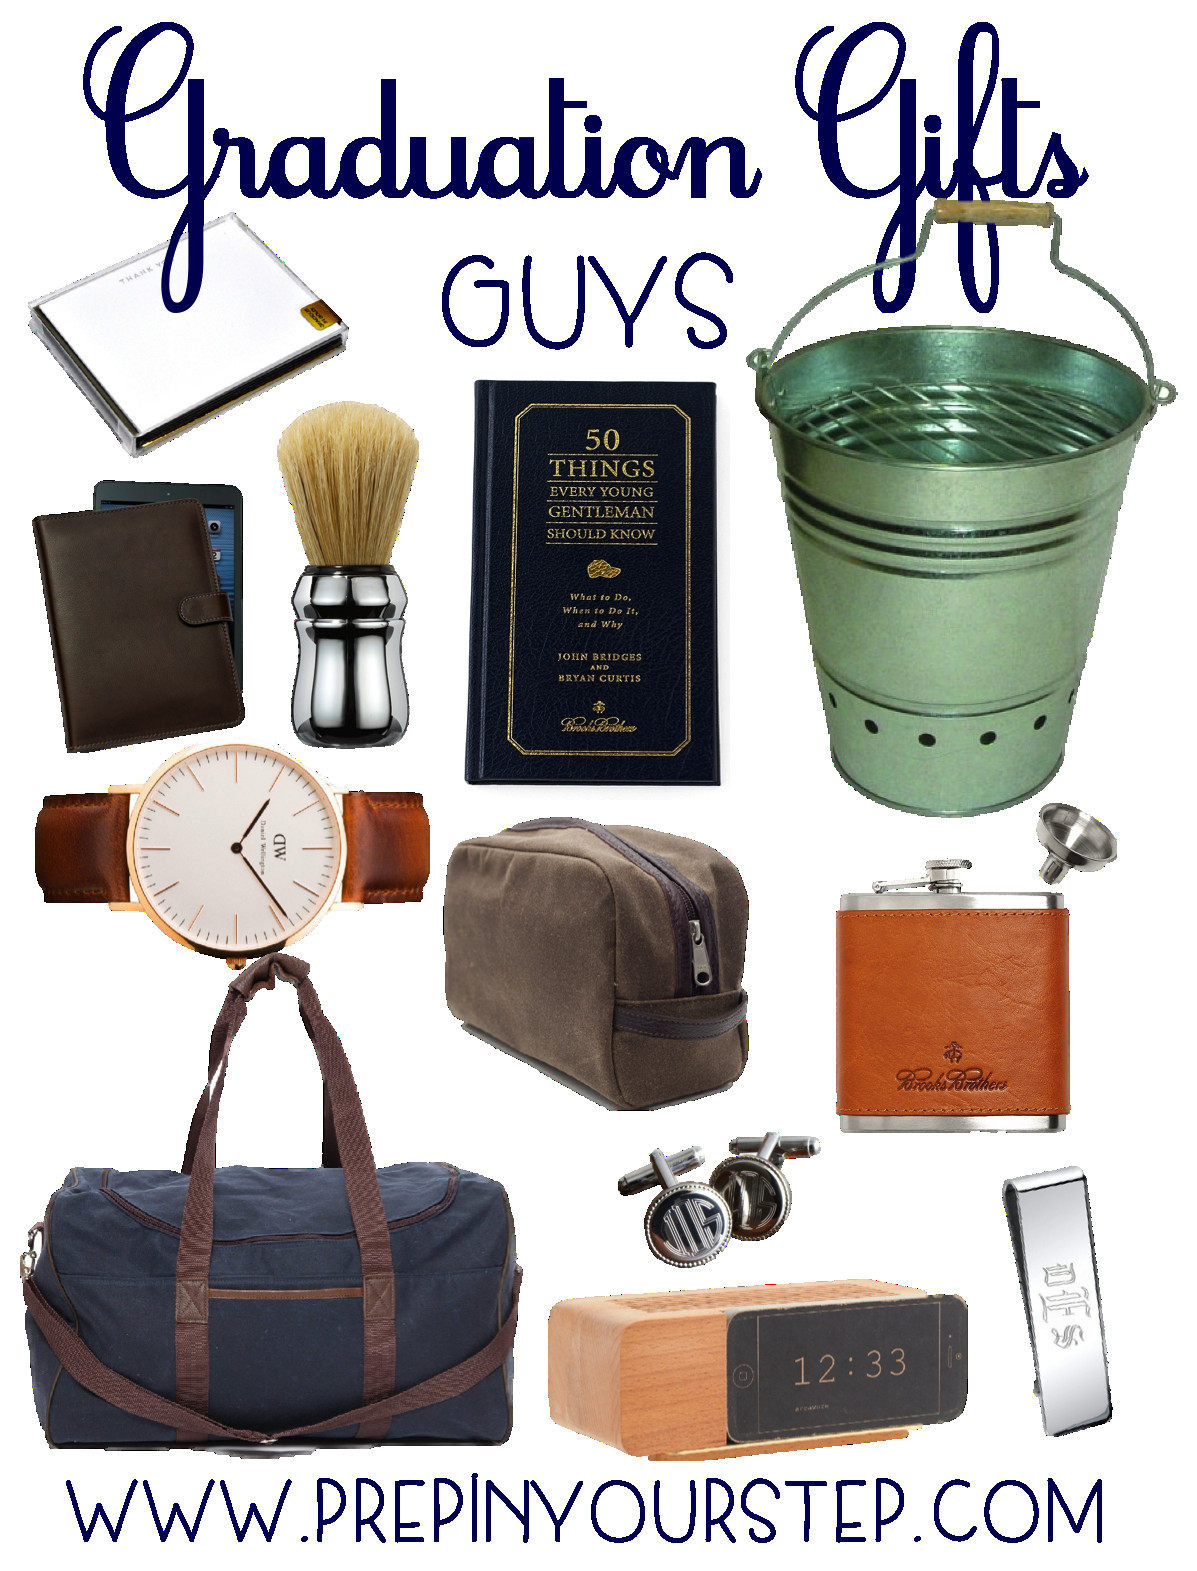 Graduation Gift Ideas For Boys
 Graduation Gift Ideas Guys & Girls Prep In Your Step